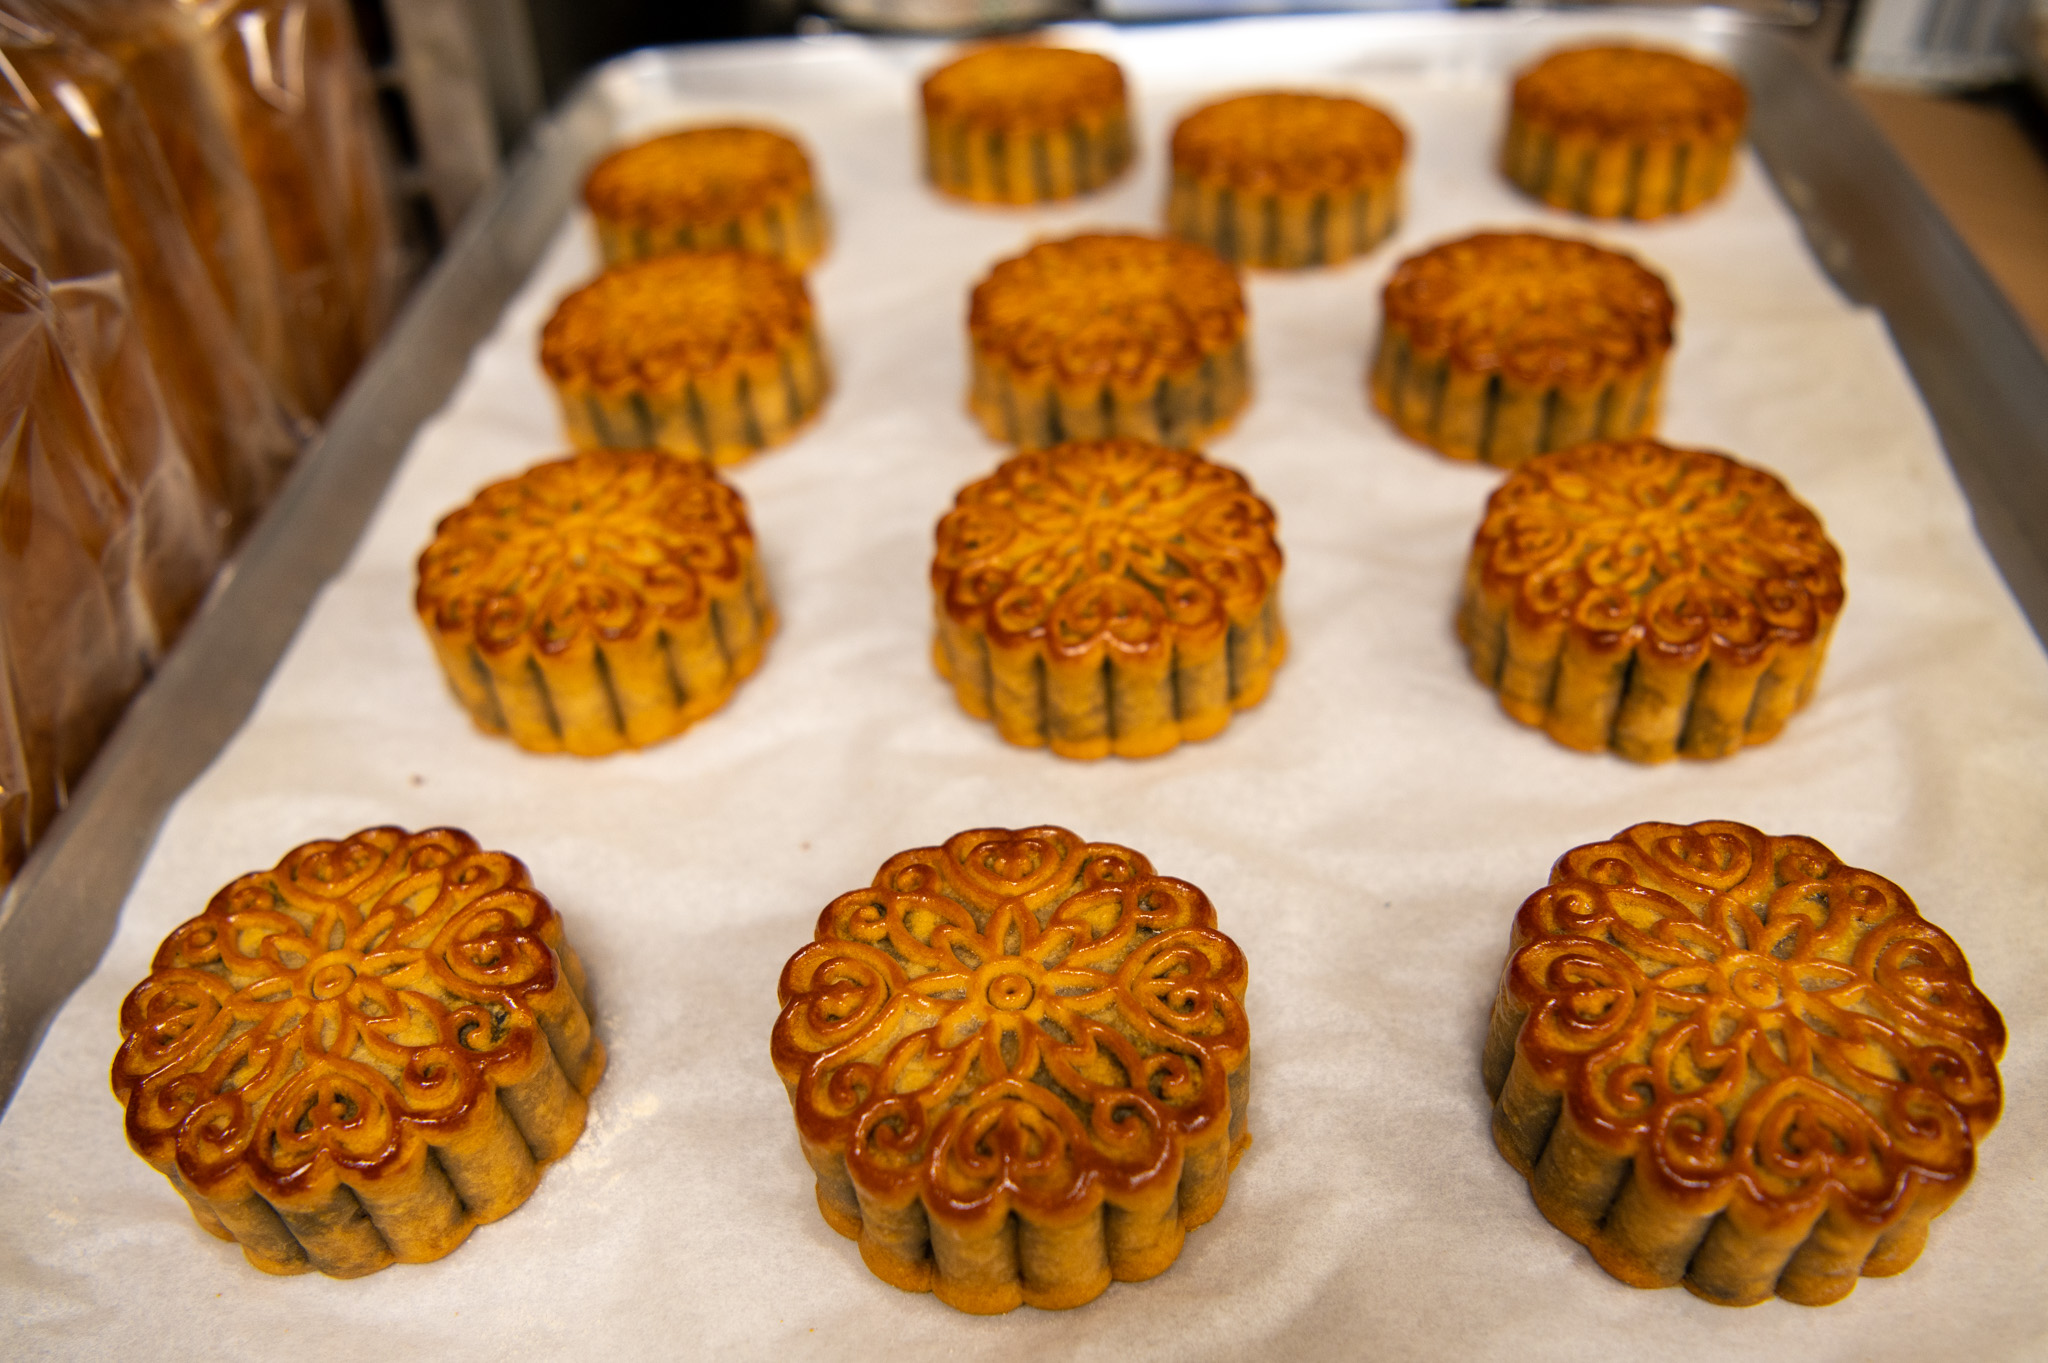 Pickles and Pork? Here Are Some of San Francisco’s Most Unusual Mooncake Flavors